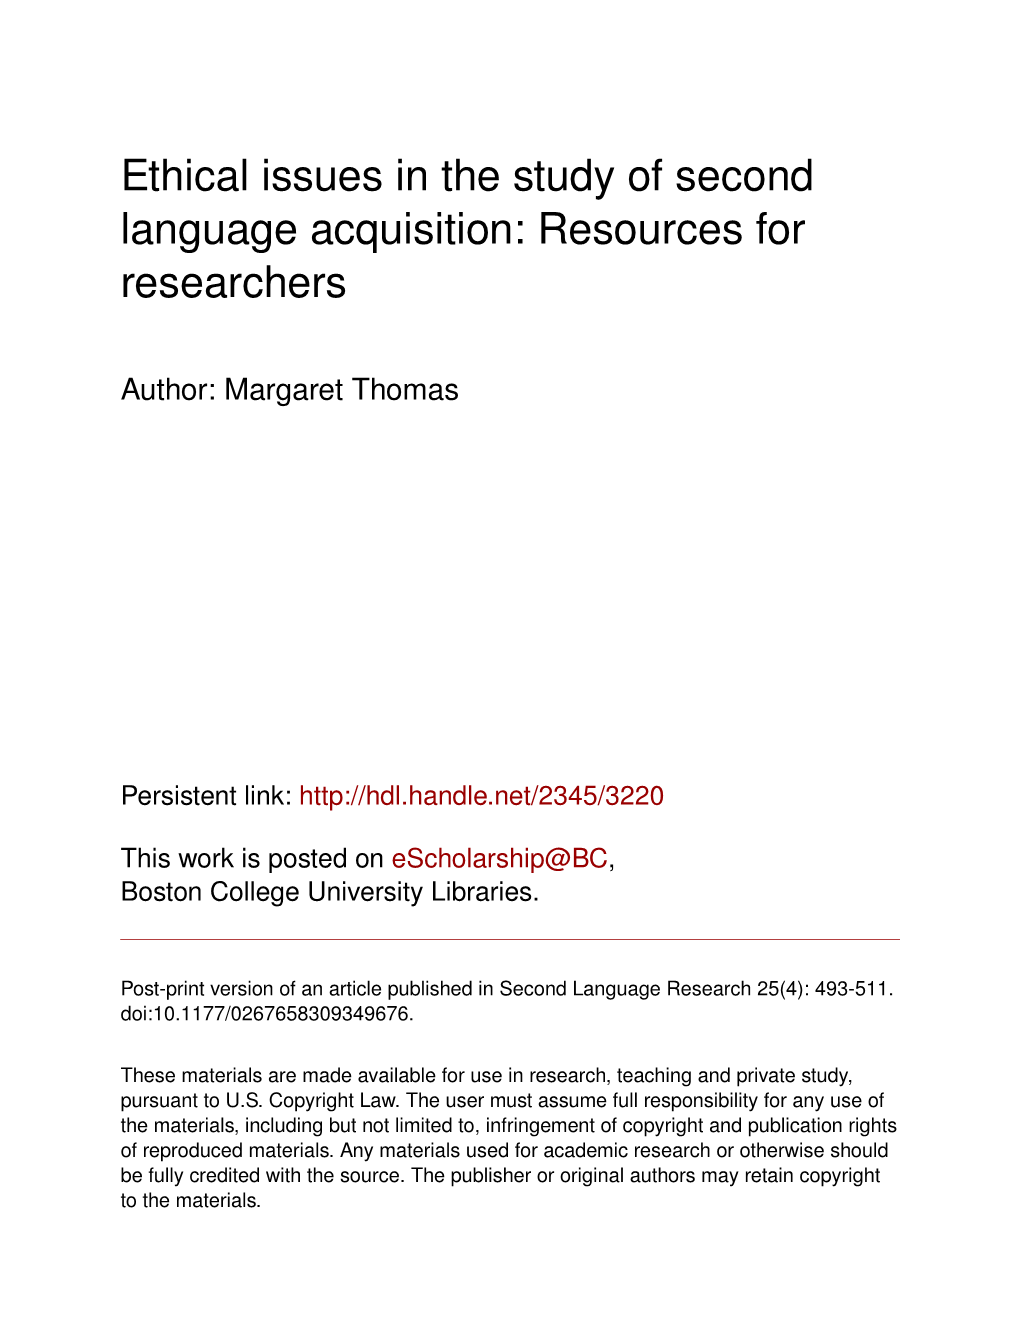 Ethical Issues in the Study of Second Language Acquisition: Resources for Researchers